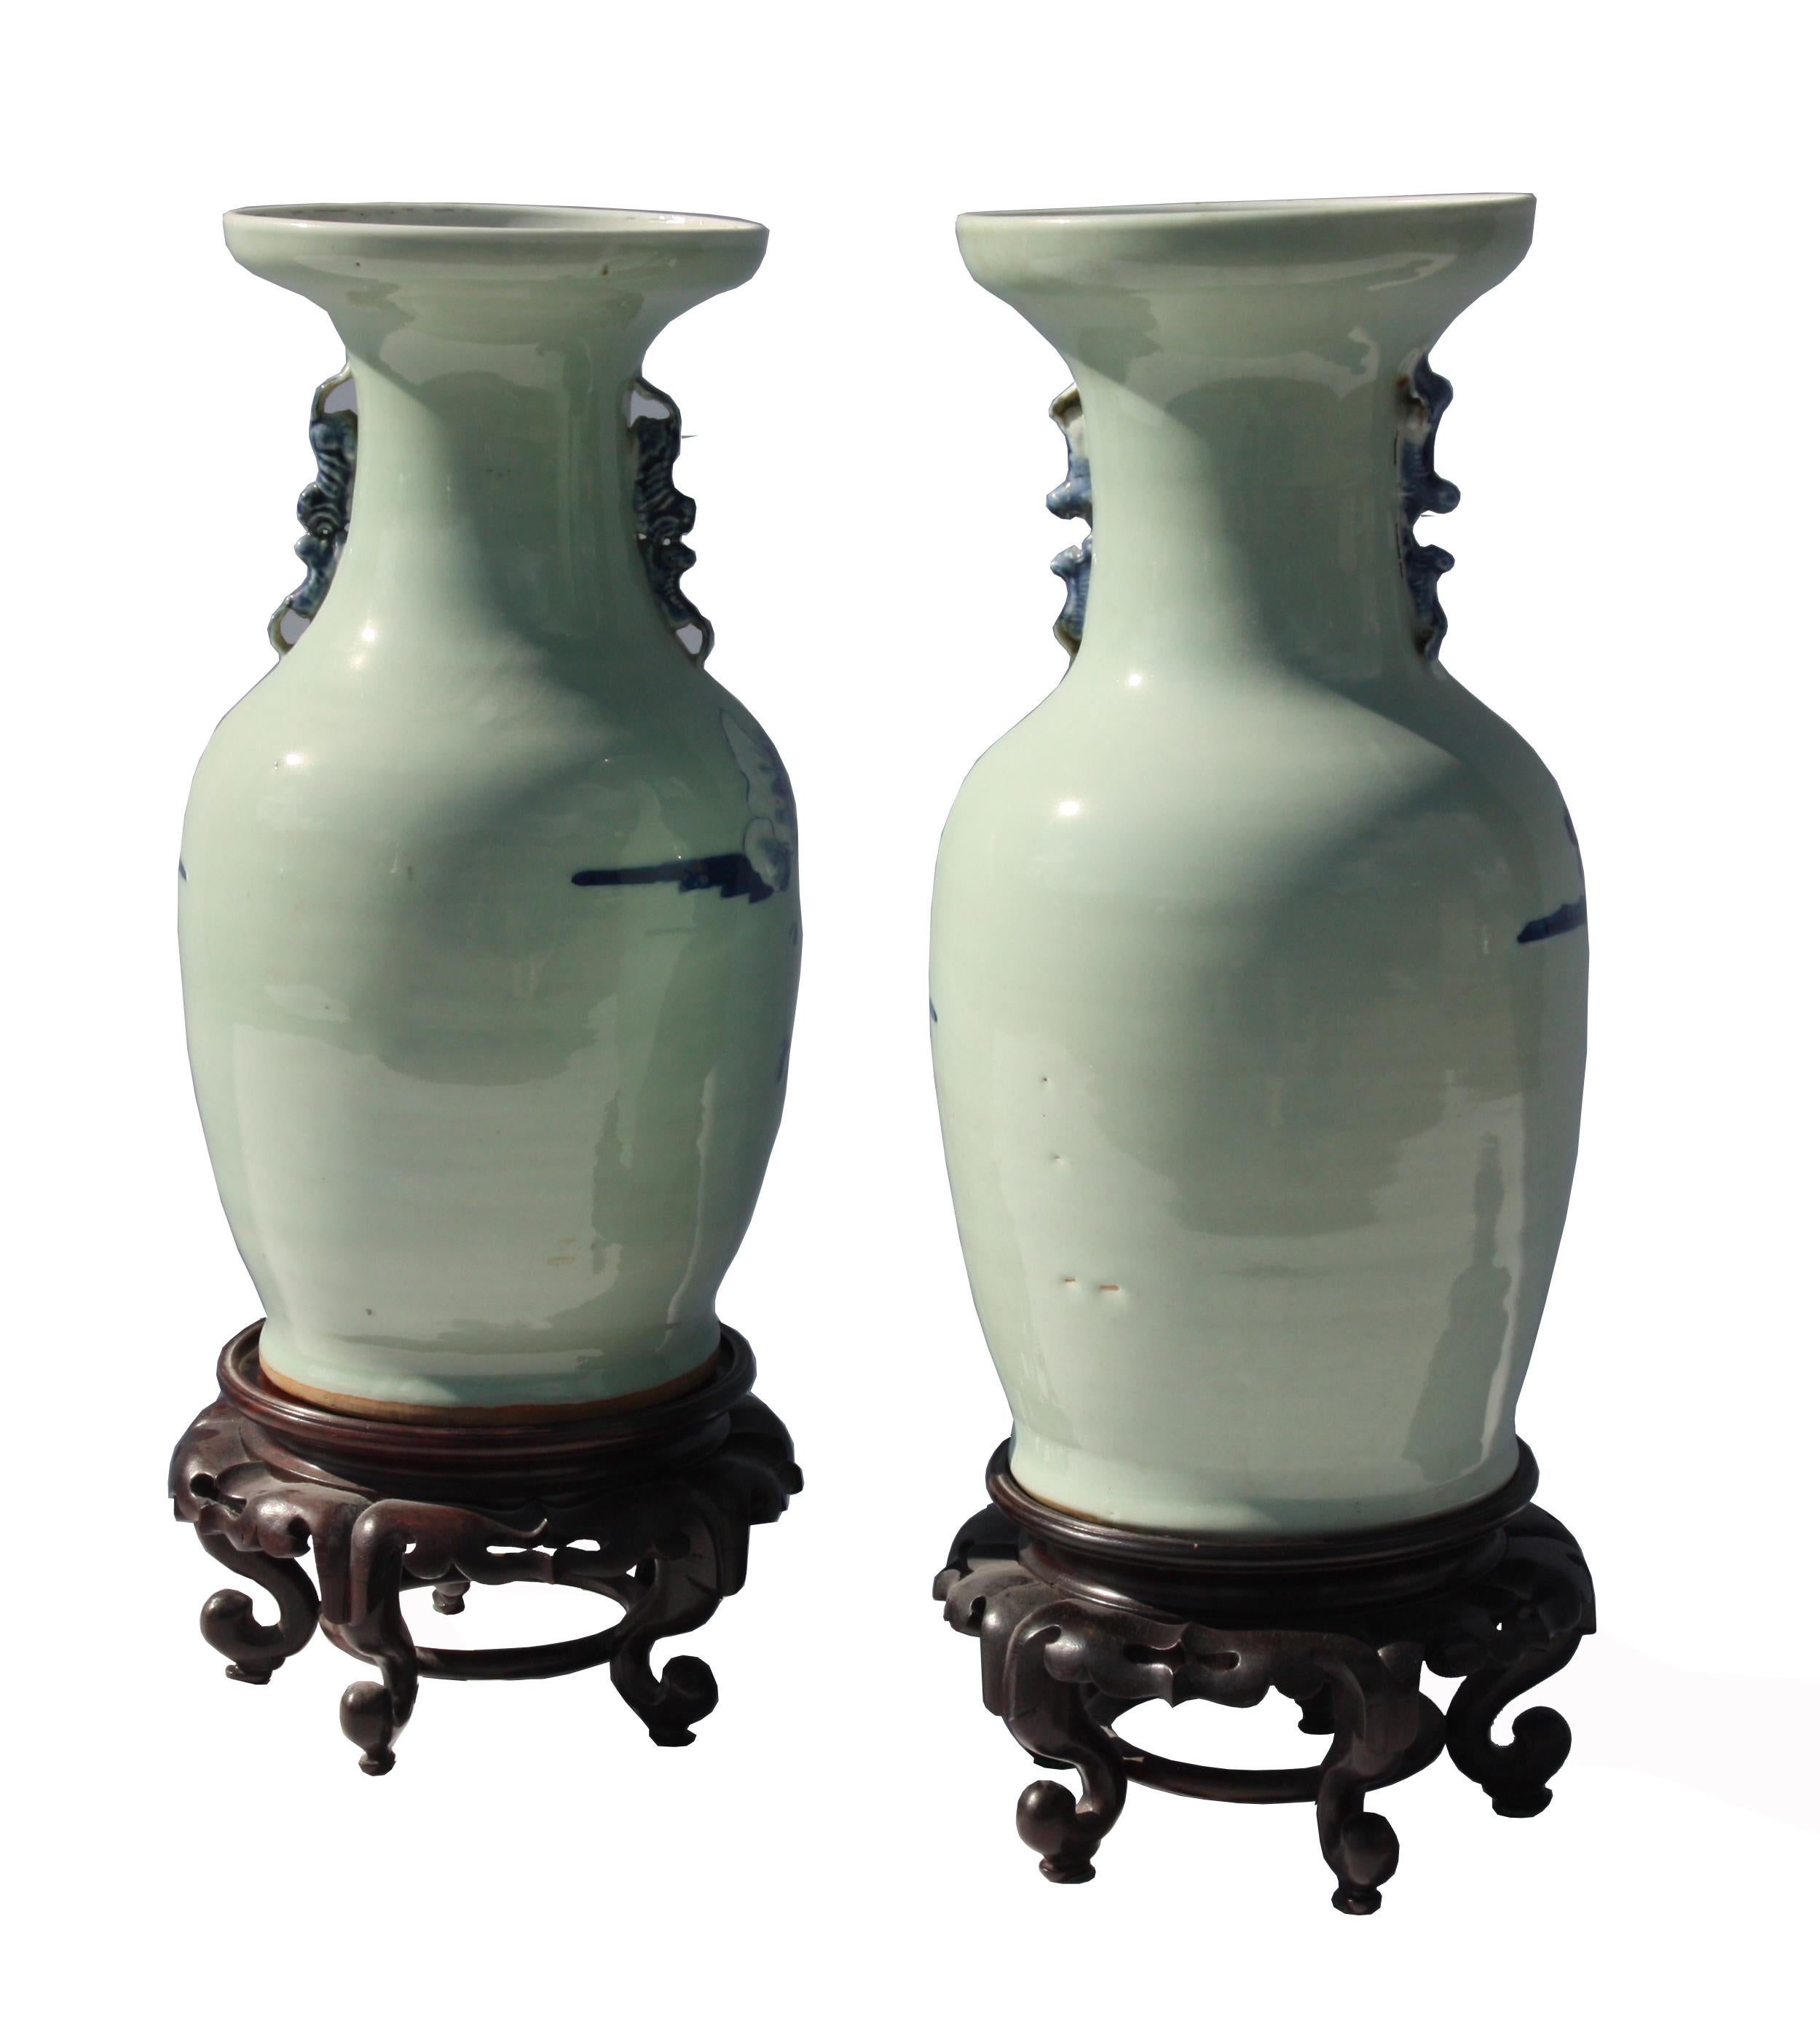 Two celadon vases decorated with five horses amidst rocks and trees. The vases are also embellished with two stylized handles resembling dogs at the base of the trumpet neck.